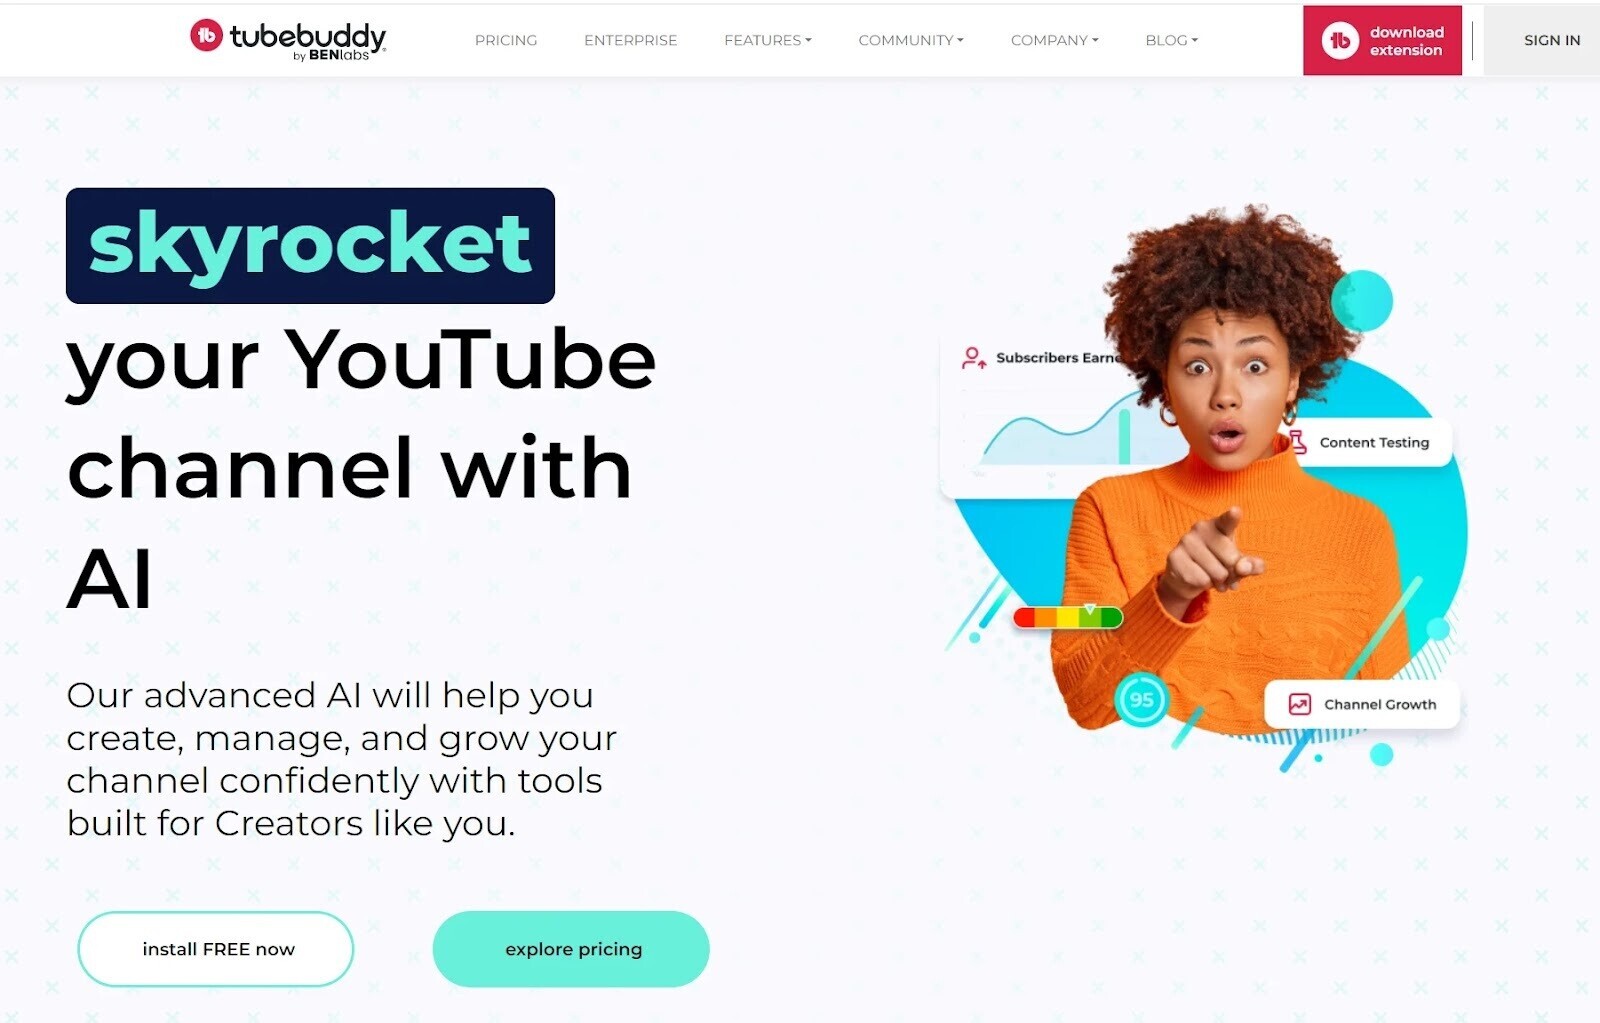 TubeBuddy home page with title "skyrocket your YouTube channel with AI"